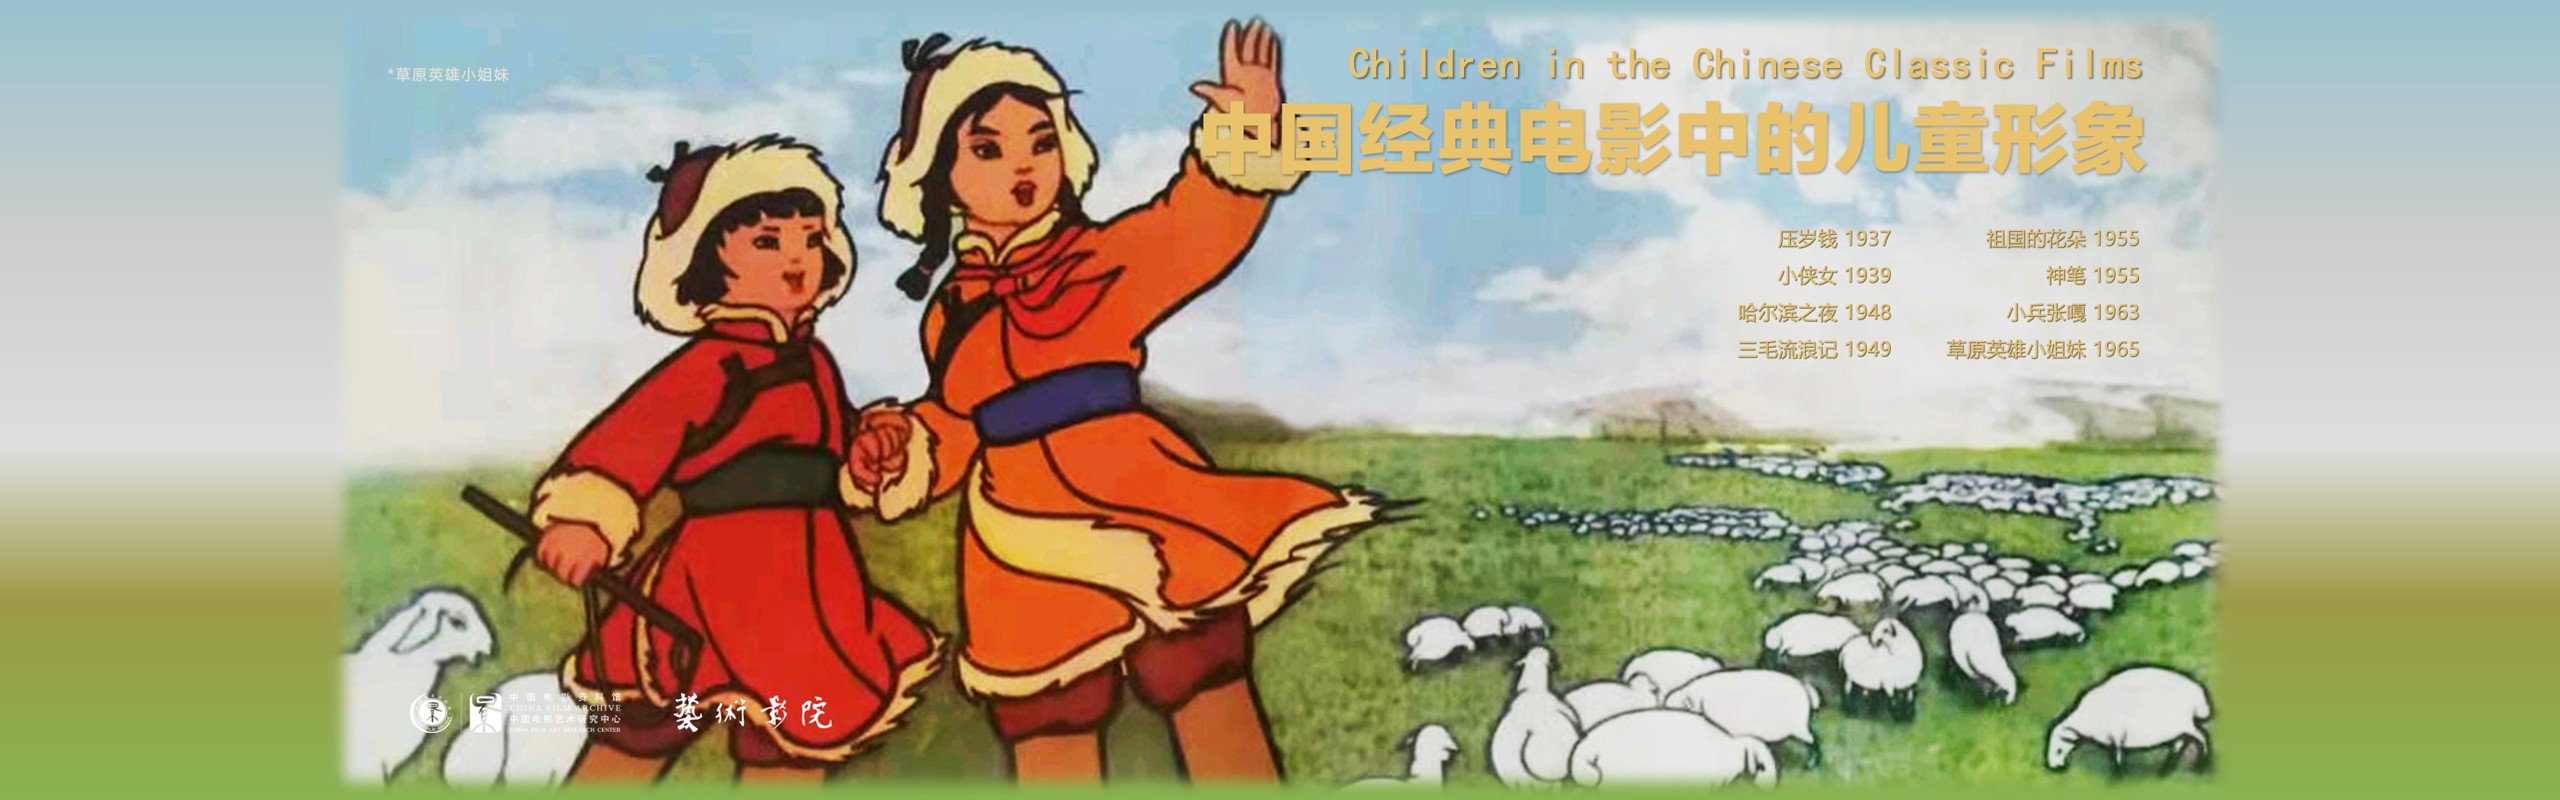 202306 Children in the Chinese Classic Films